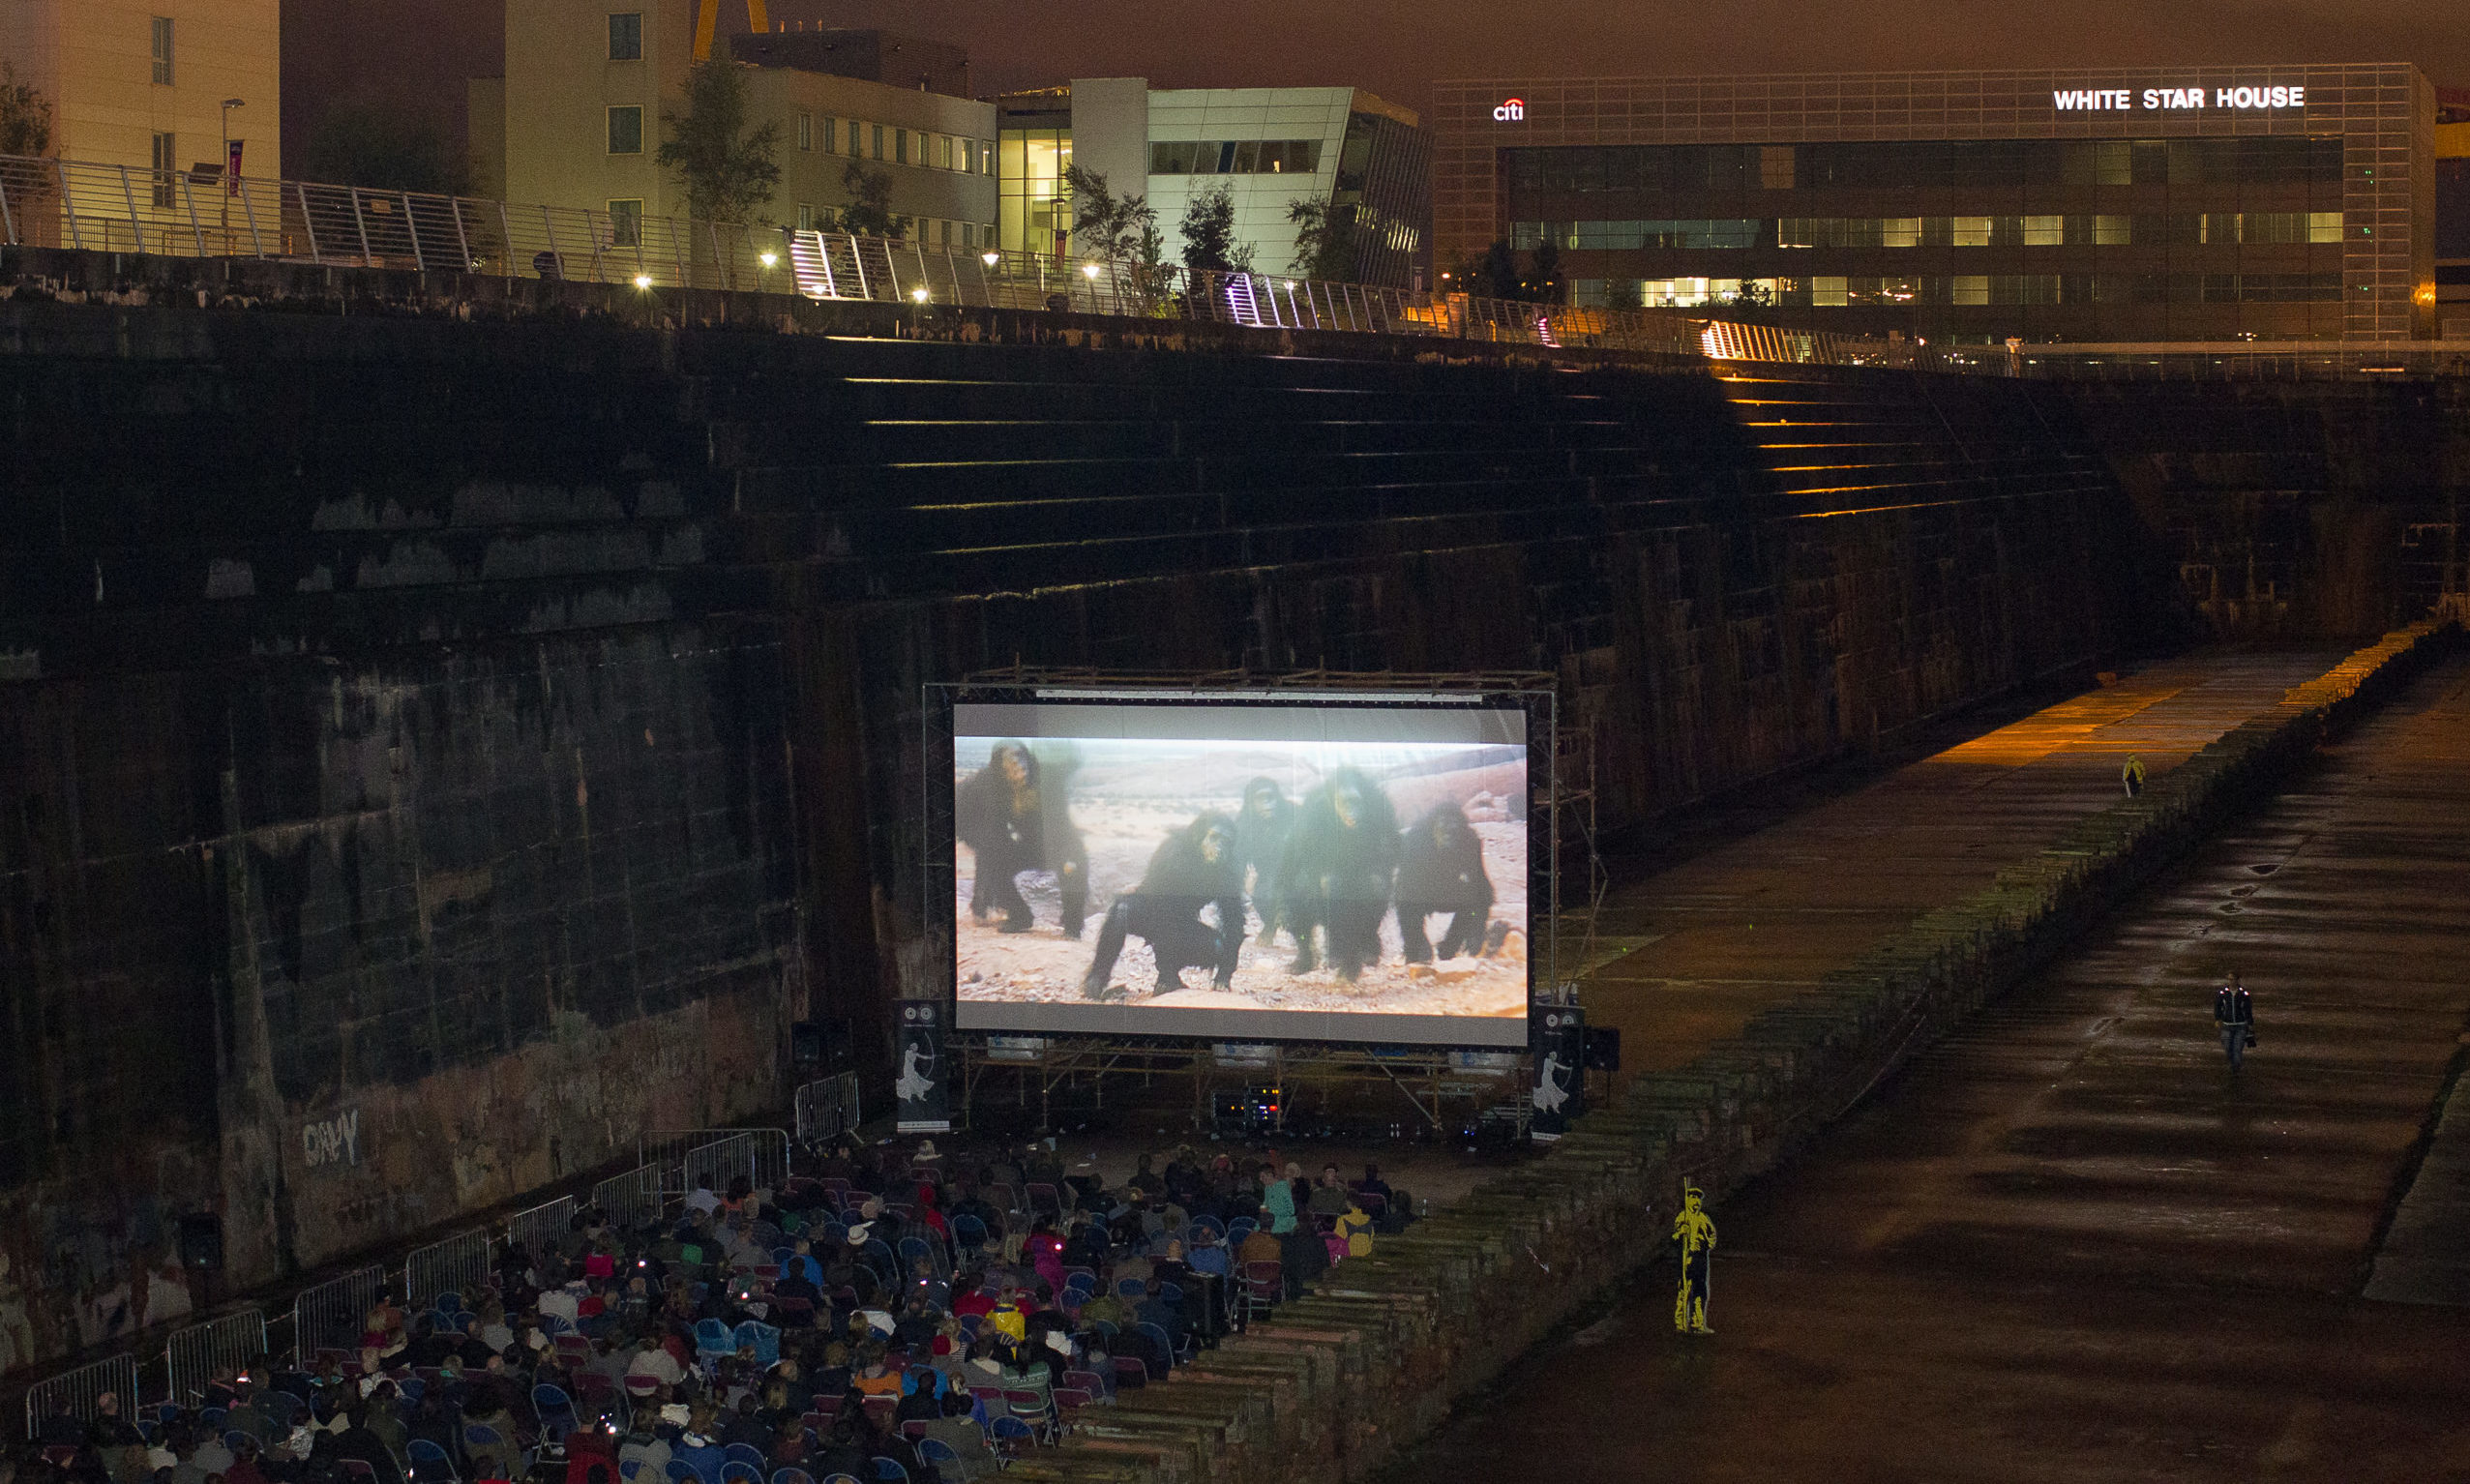 Cinema goers watch Stanley Kubrick's, 2001: A Space Odyssey, at Harland & Wolff Shipyard's, Titanic Dry Dock during the 2013 Belfast Film Festival.